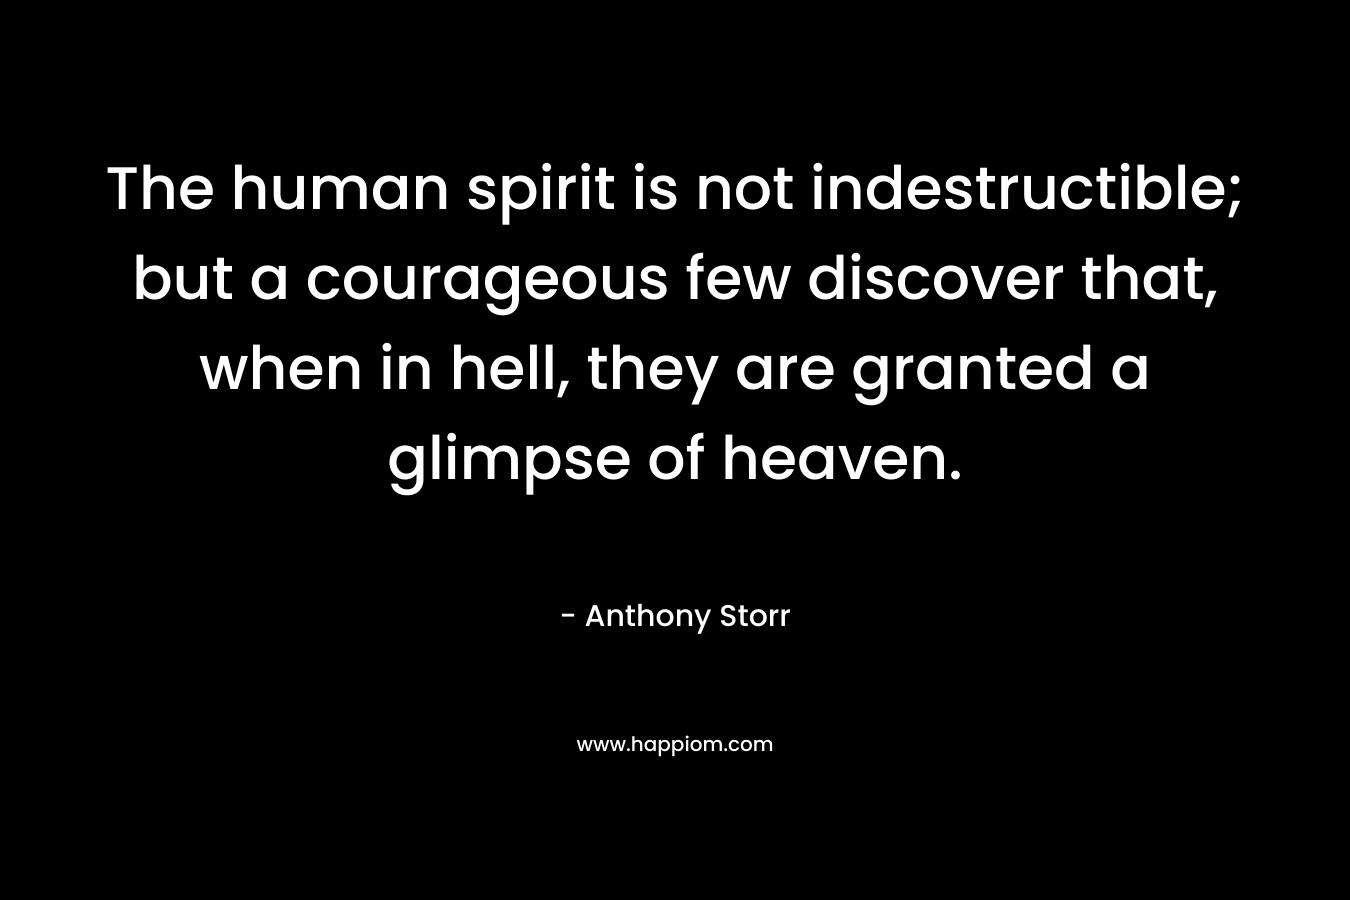 The human spirit is not indestructible; but a courageous few discover that, when in hell, they are granted a glimpse of heaven.